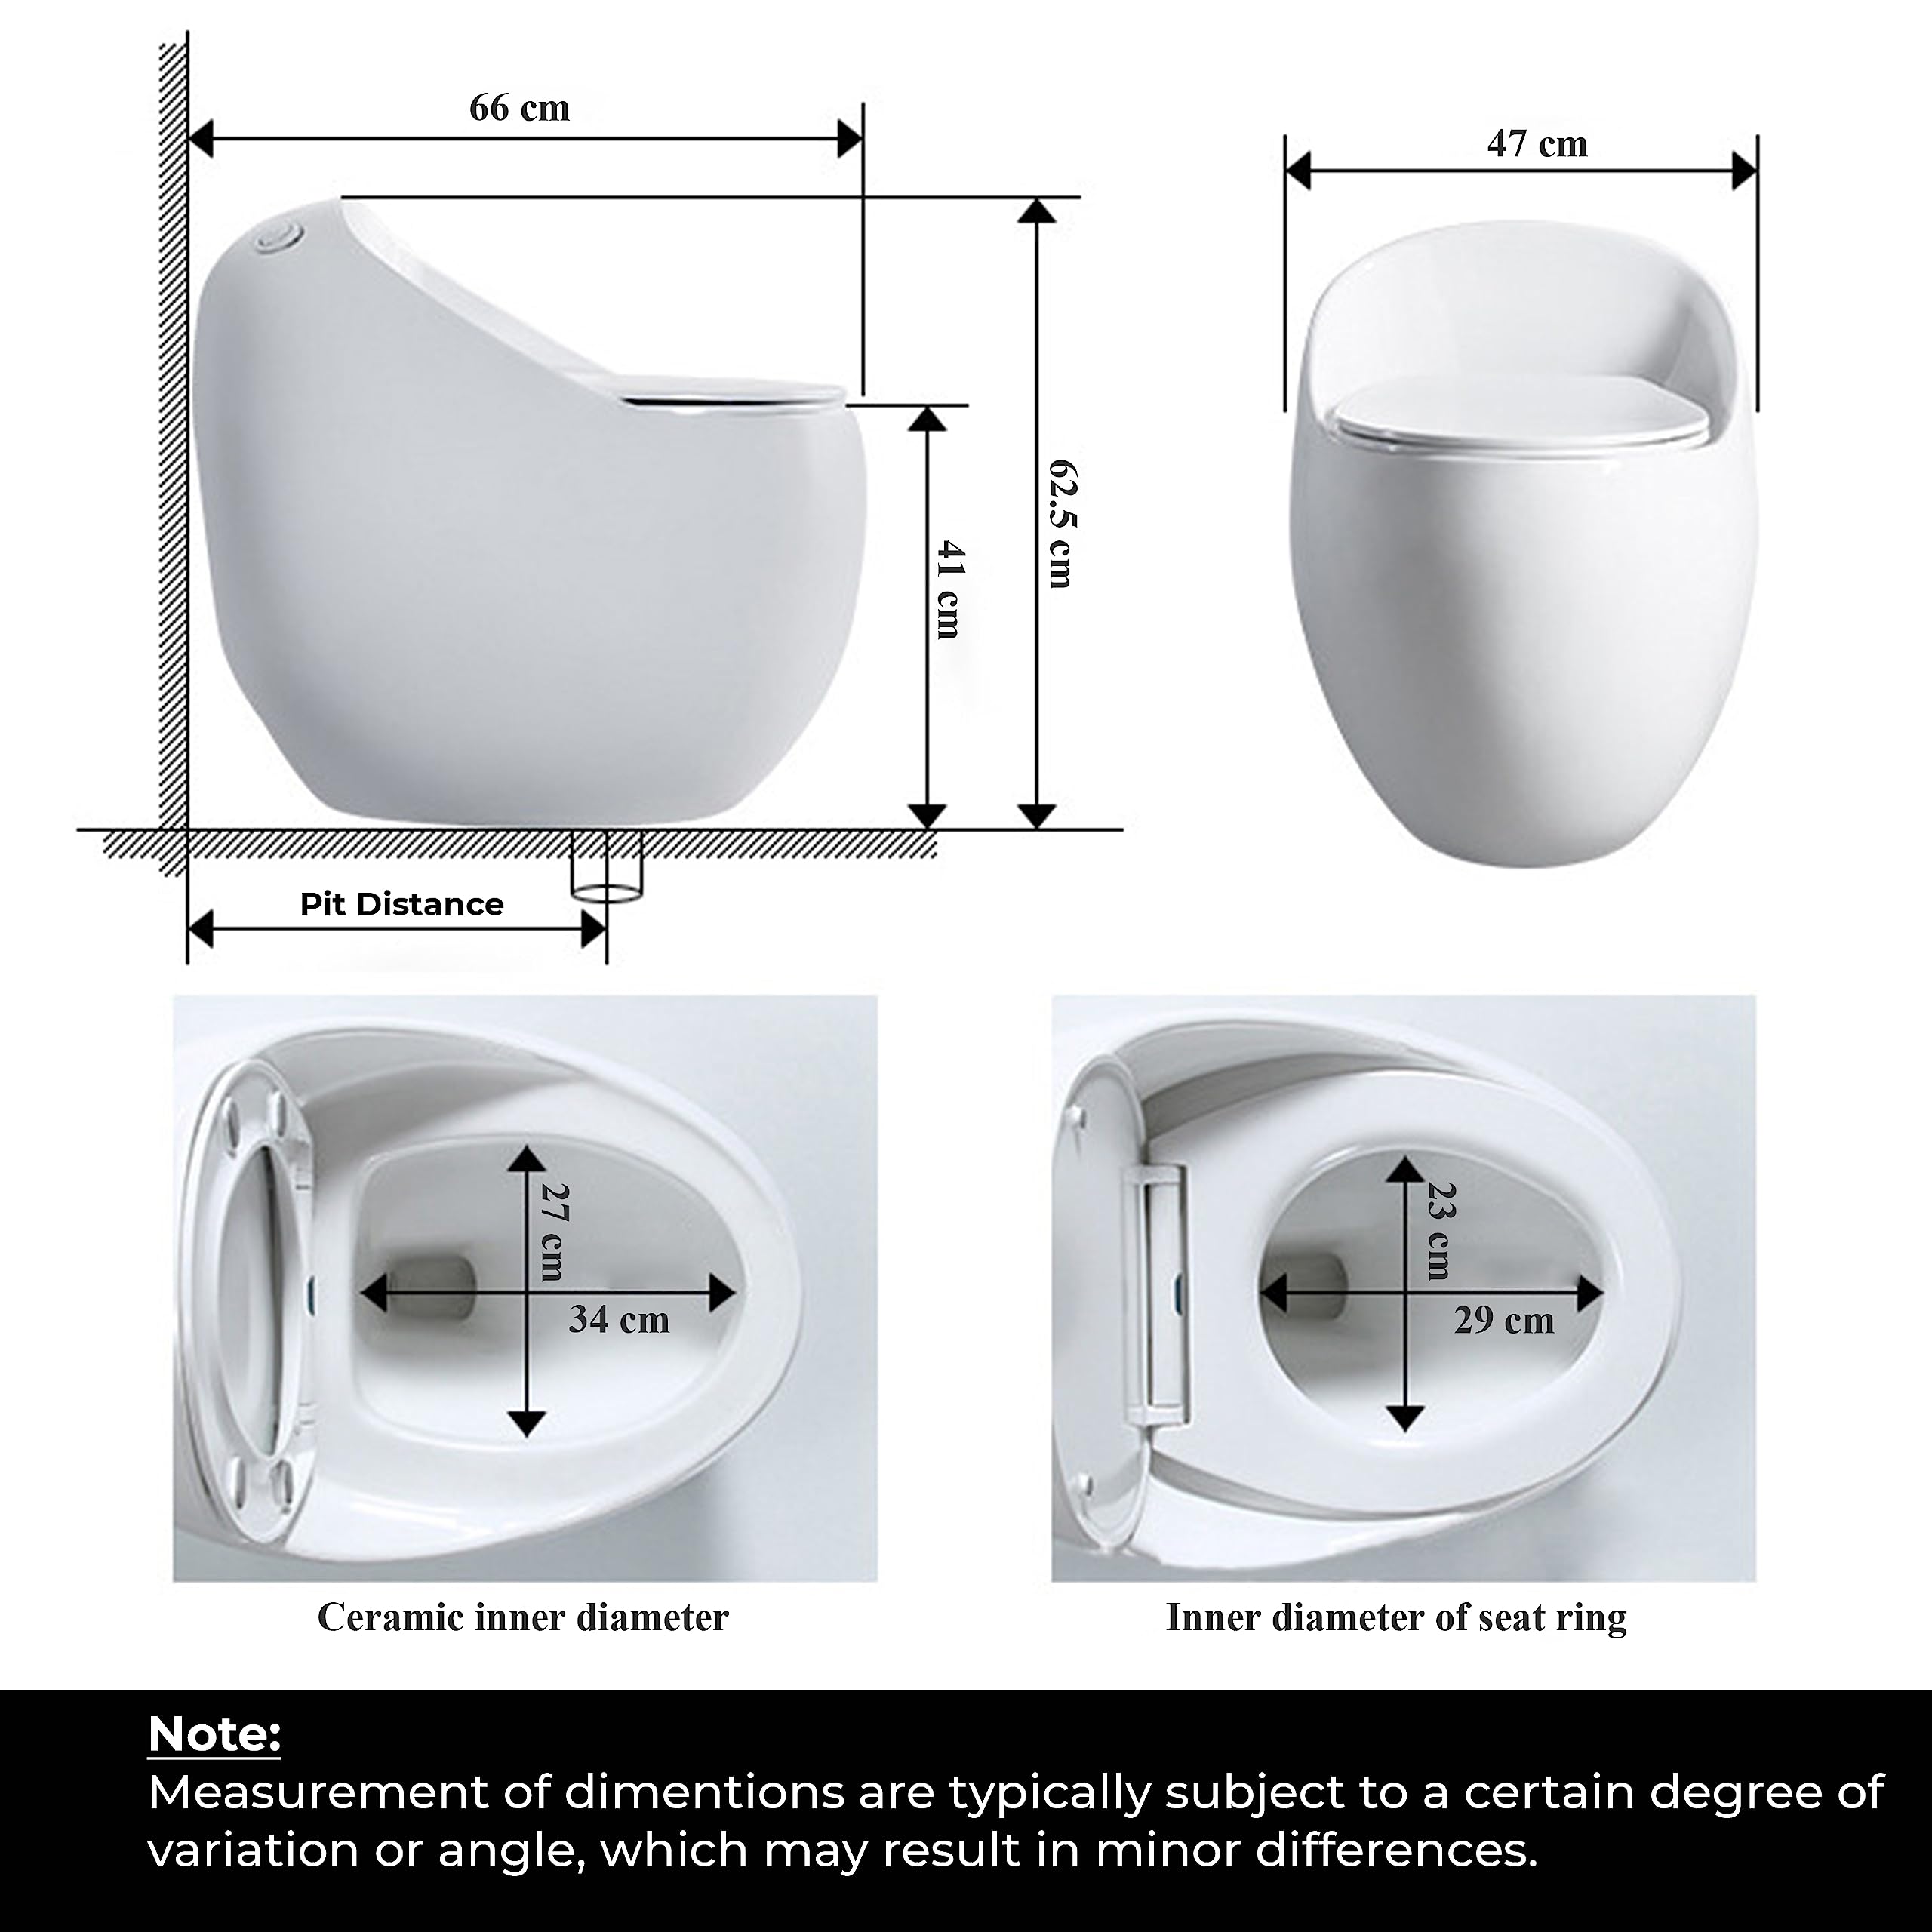 Plantex Platinium Ceramic Rimless One Piece Western Toilet/Water Closet/Commode With Soft Close Toilet Seat - S Trap Outlet (White)